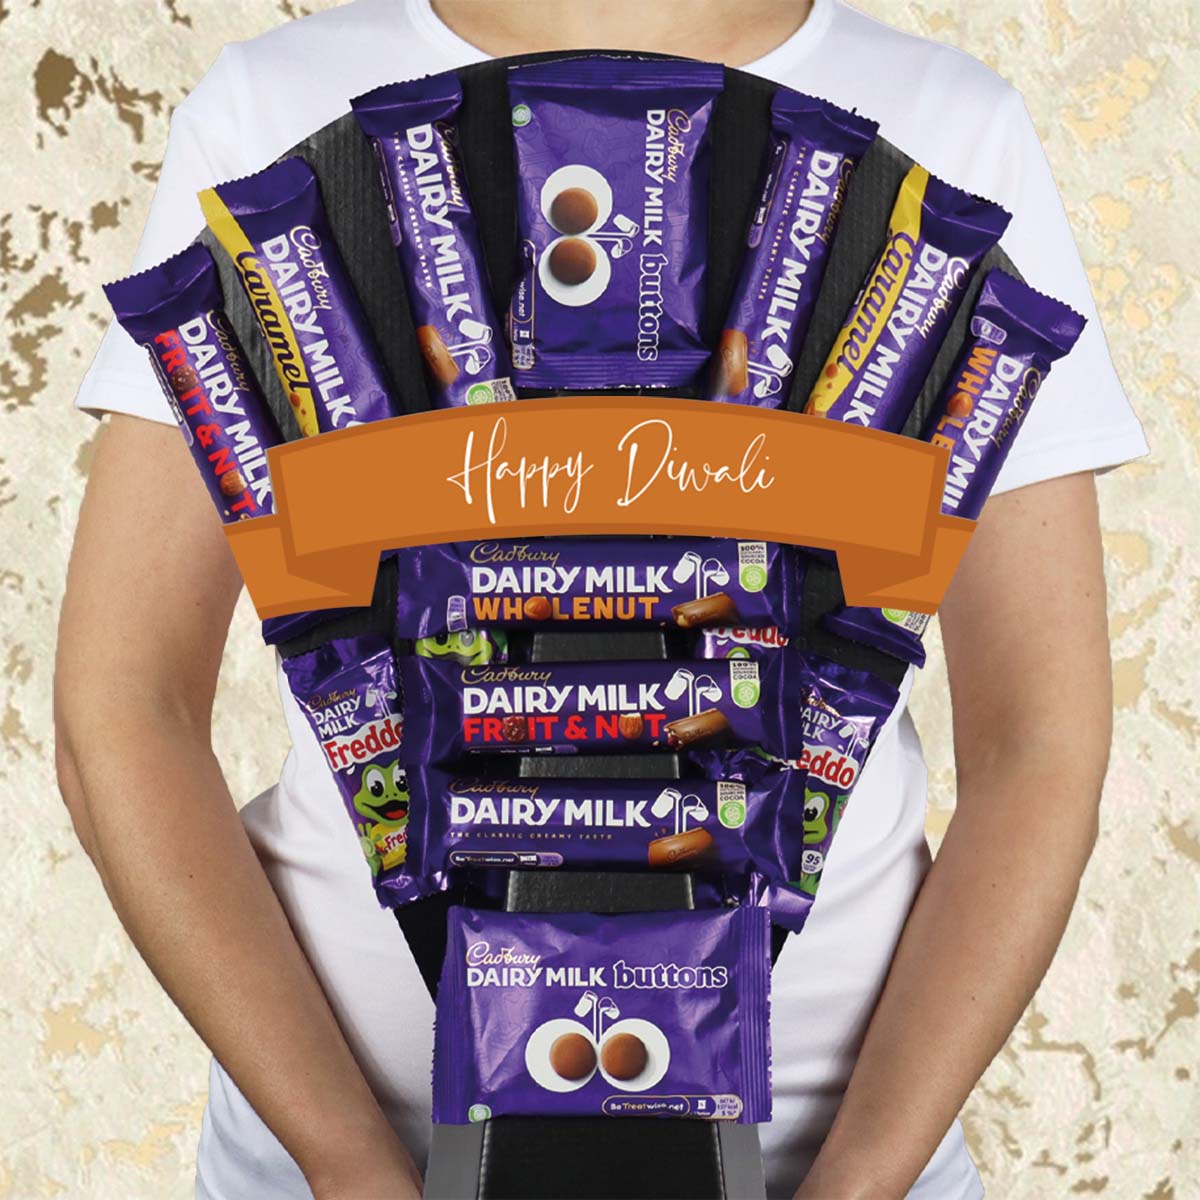 Large Dairy Milk Selection Happy Diwali Chocolate Bouquet - Celebrate The Festival Of Light - Gift Hamper Box by HamperWell